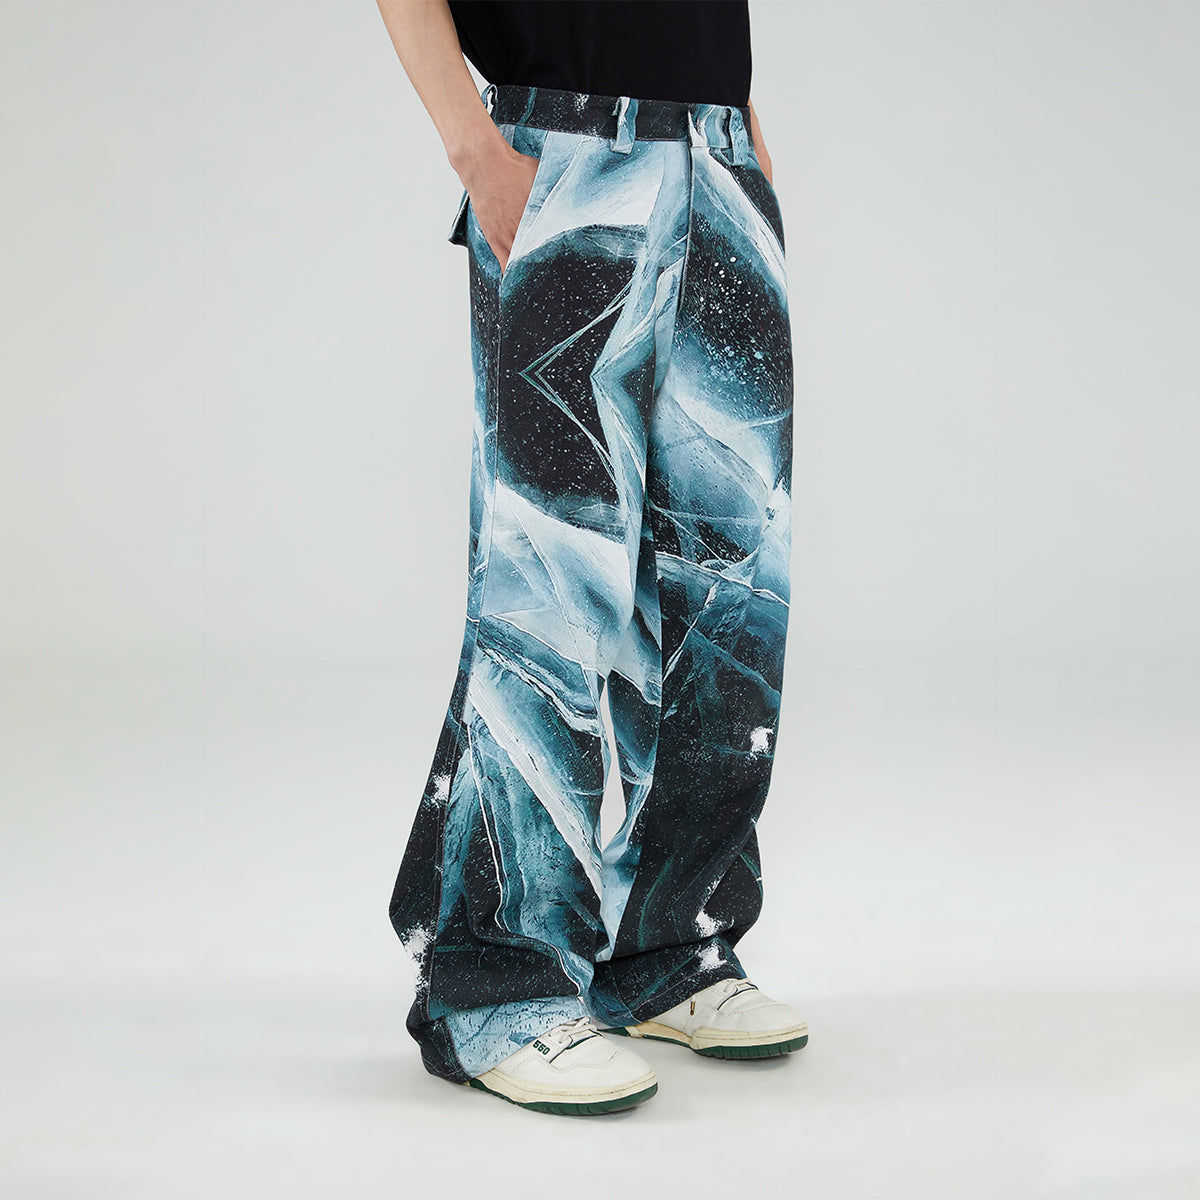 FMACM 23SS “Cooling Down” Ice Cube Full Print Straight Pants